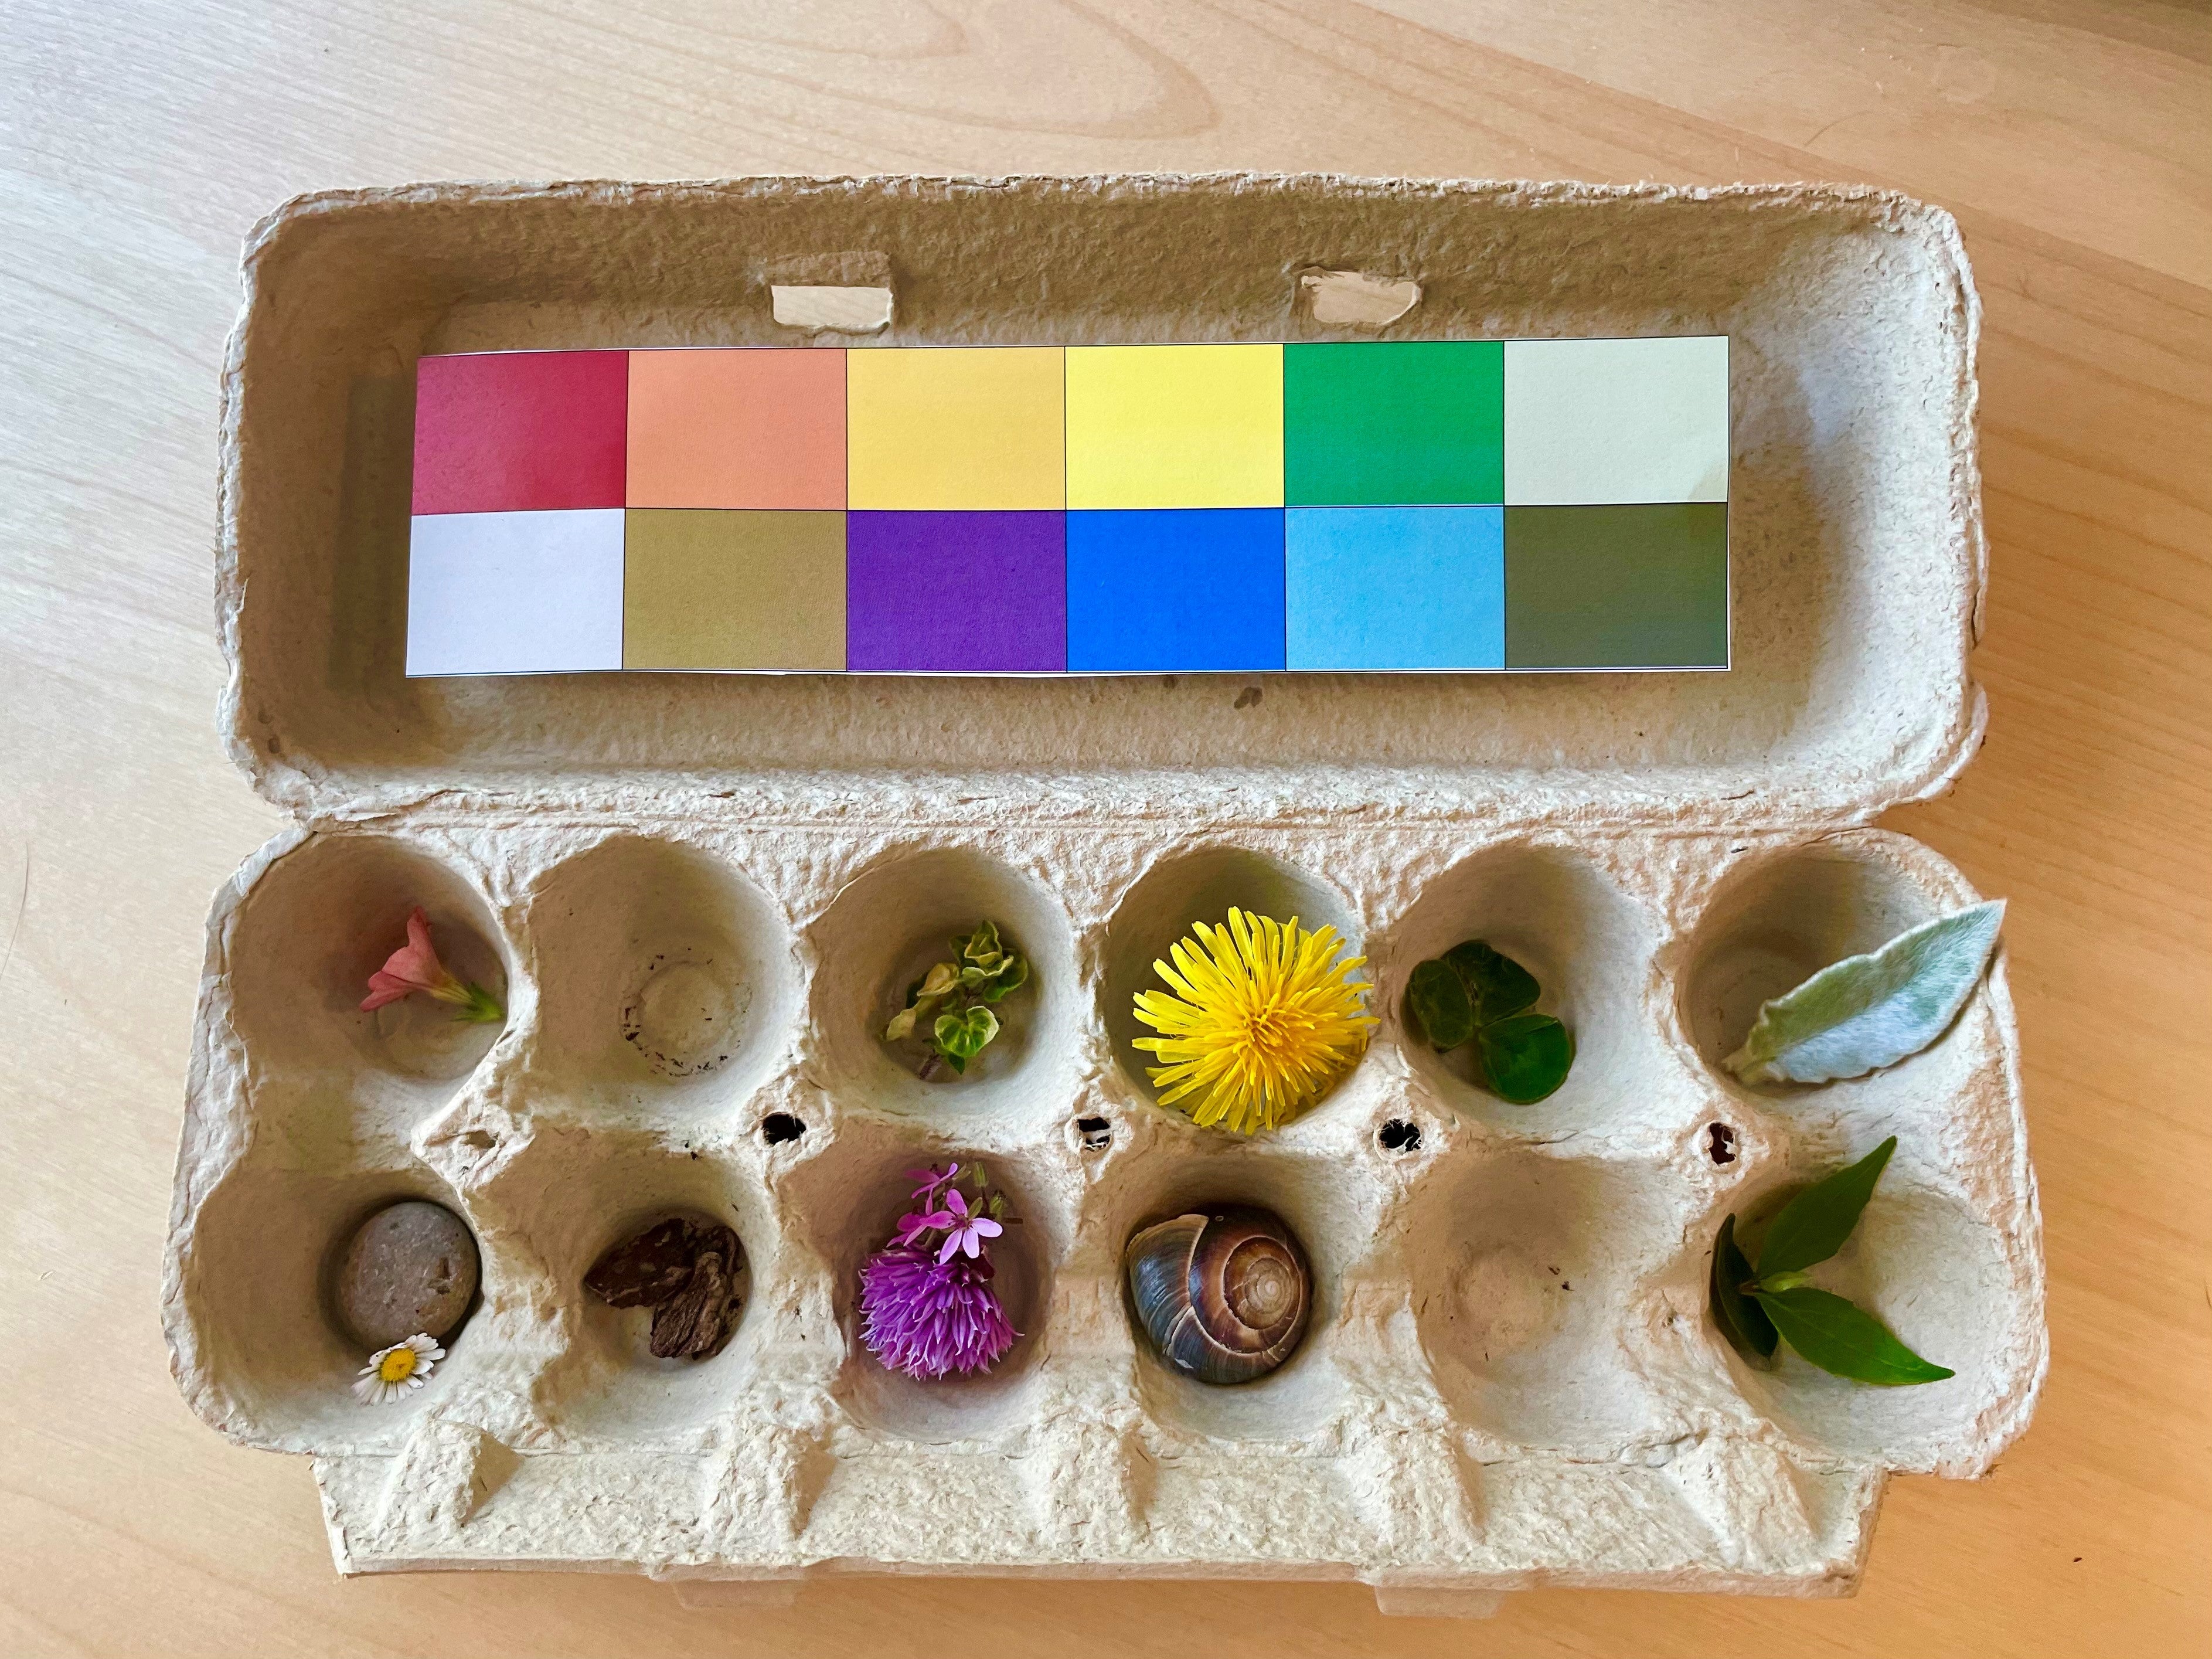 An egg carton with each egg chamber holding a leaf, a flower, or other item from the forest